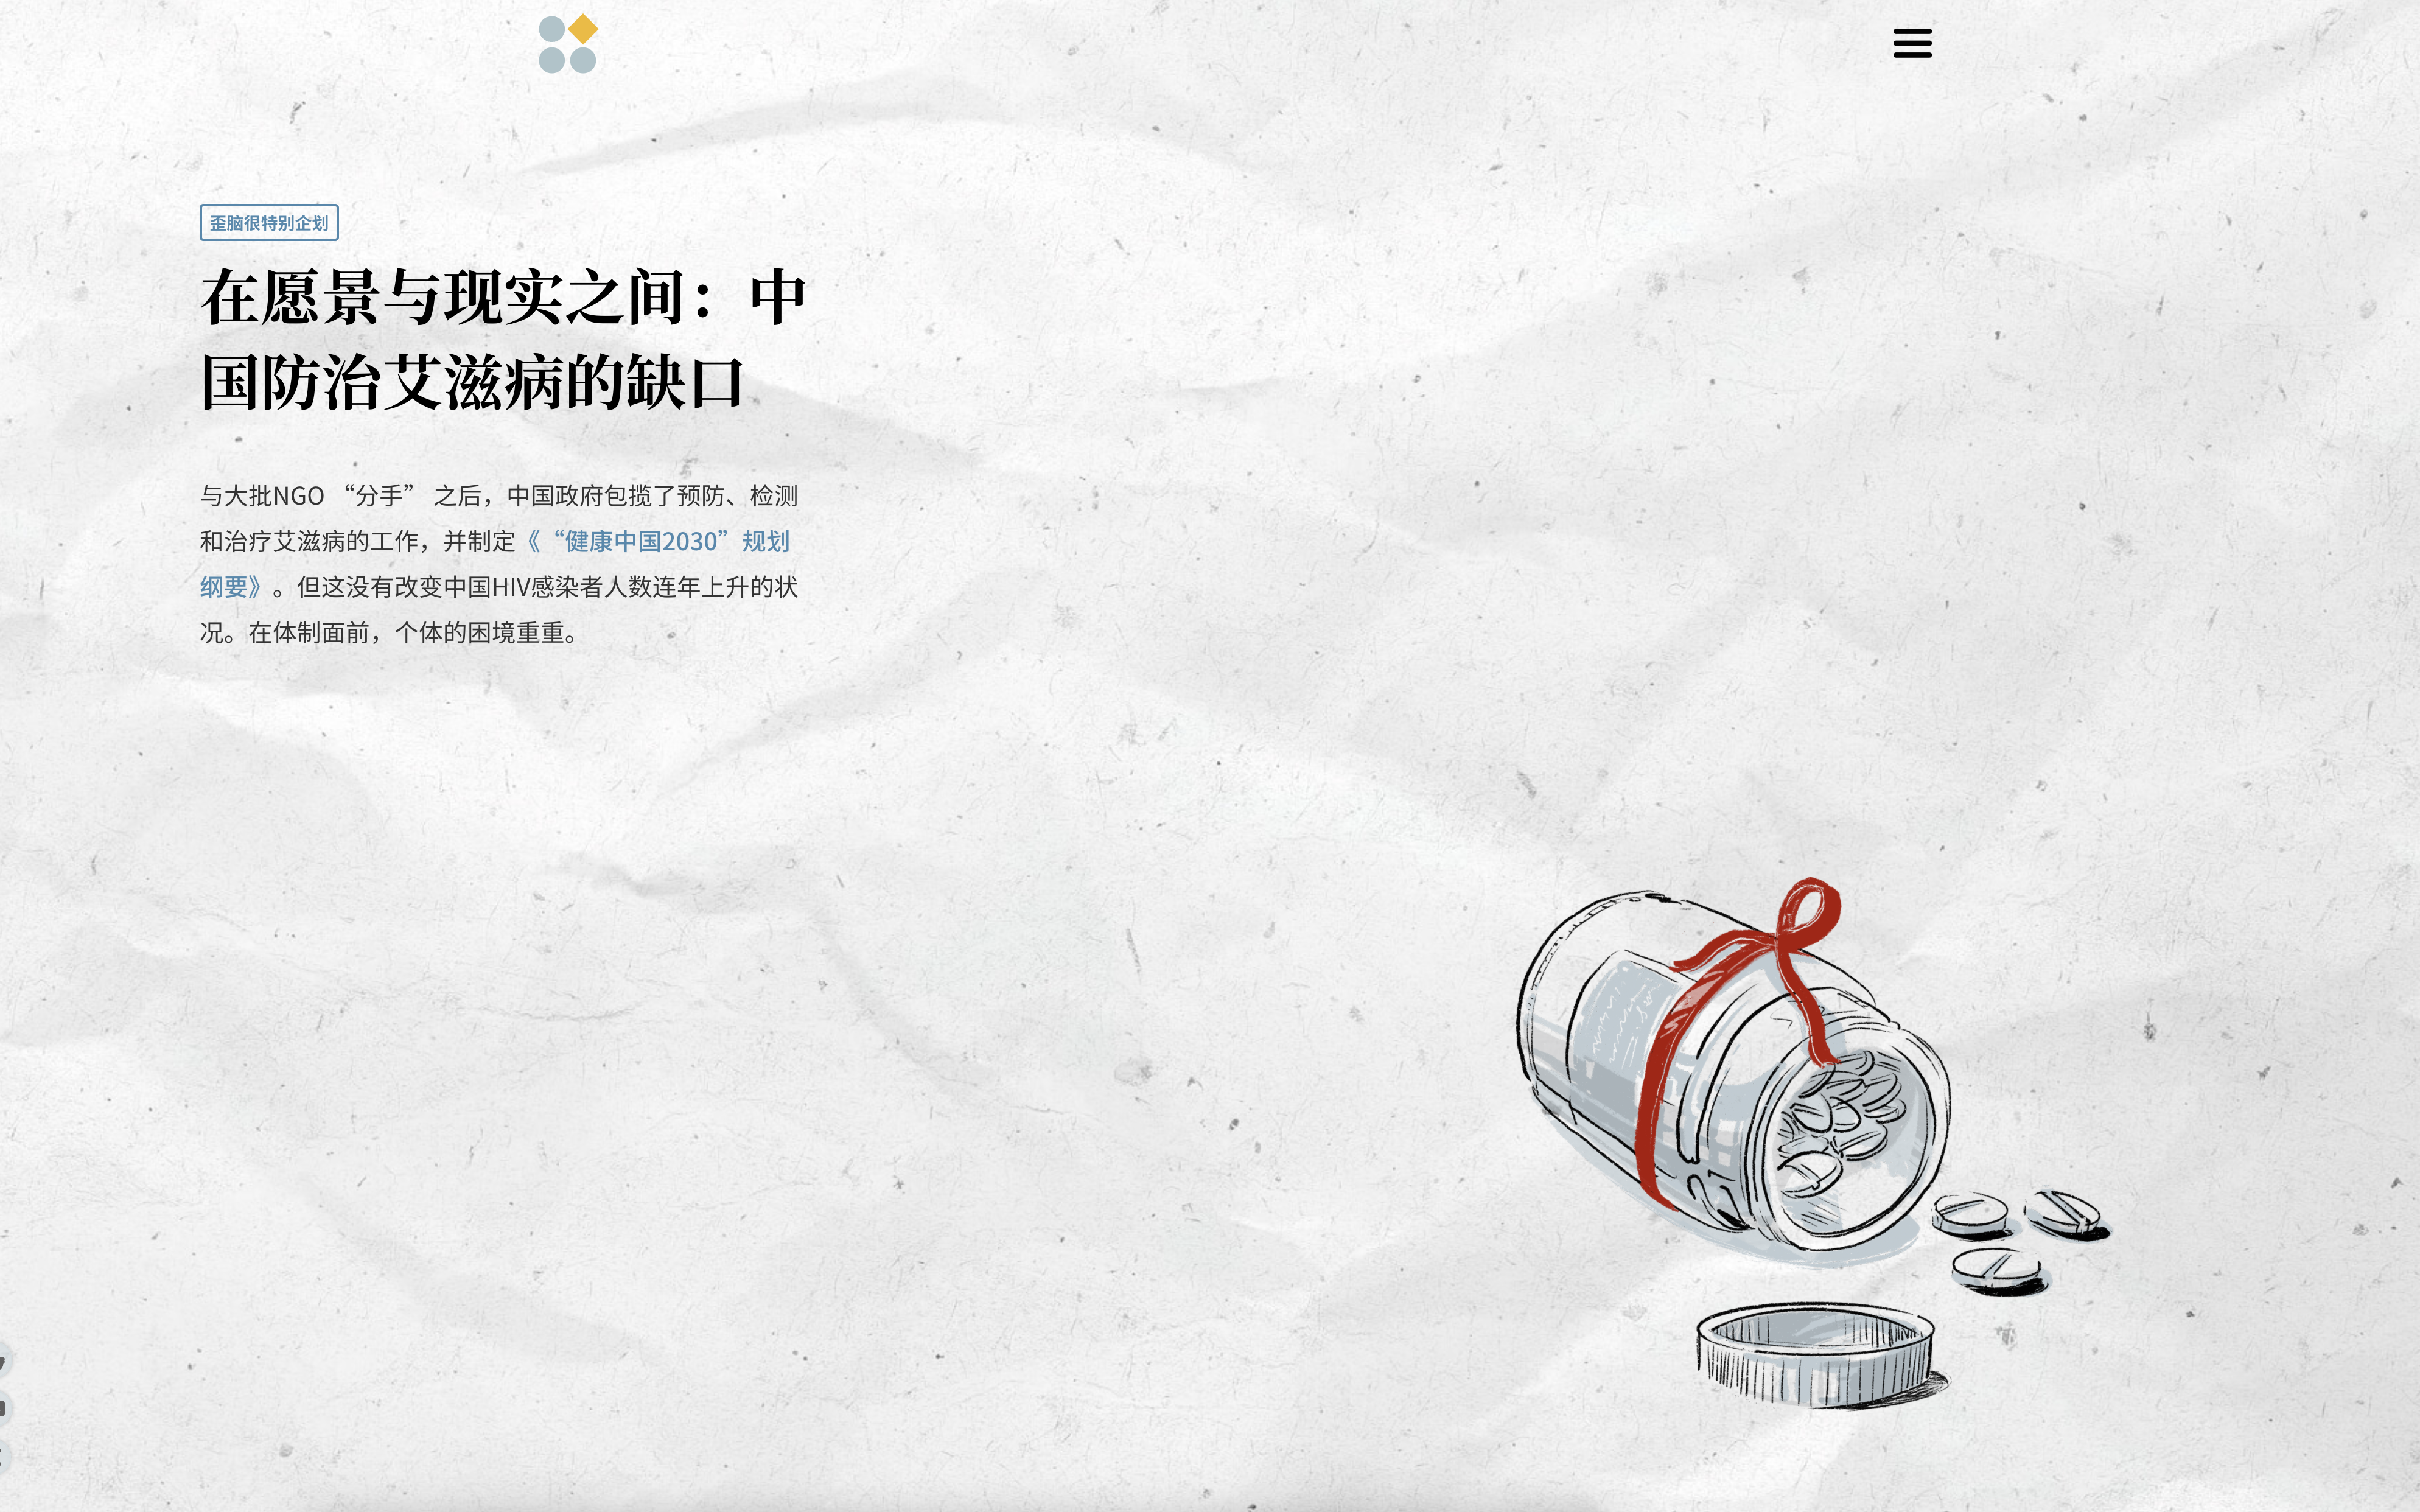 RFA online affiliate 歪脑 | WHYNOT wins at 43rd Society of News Design awards